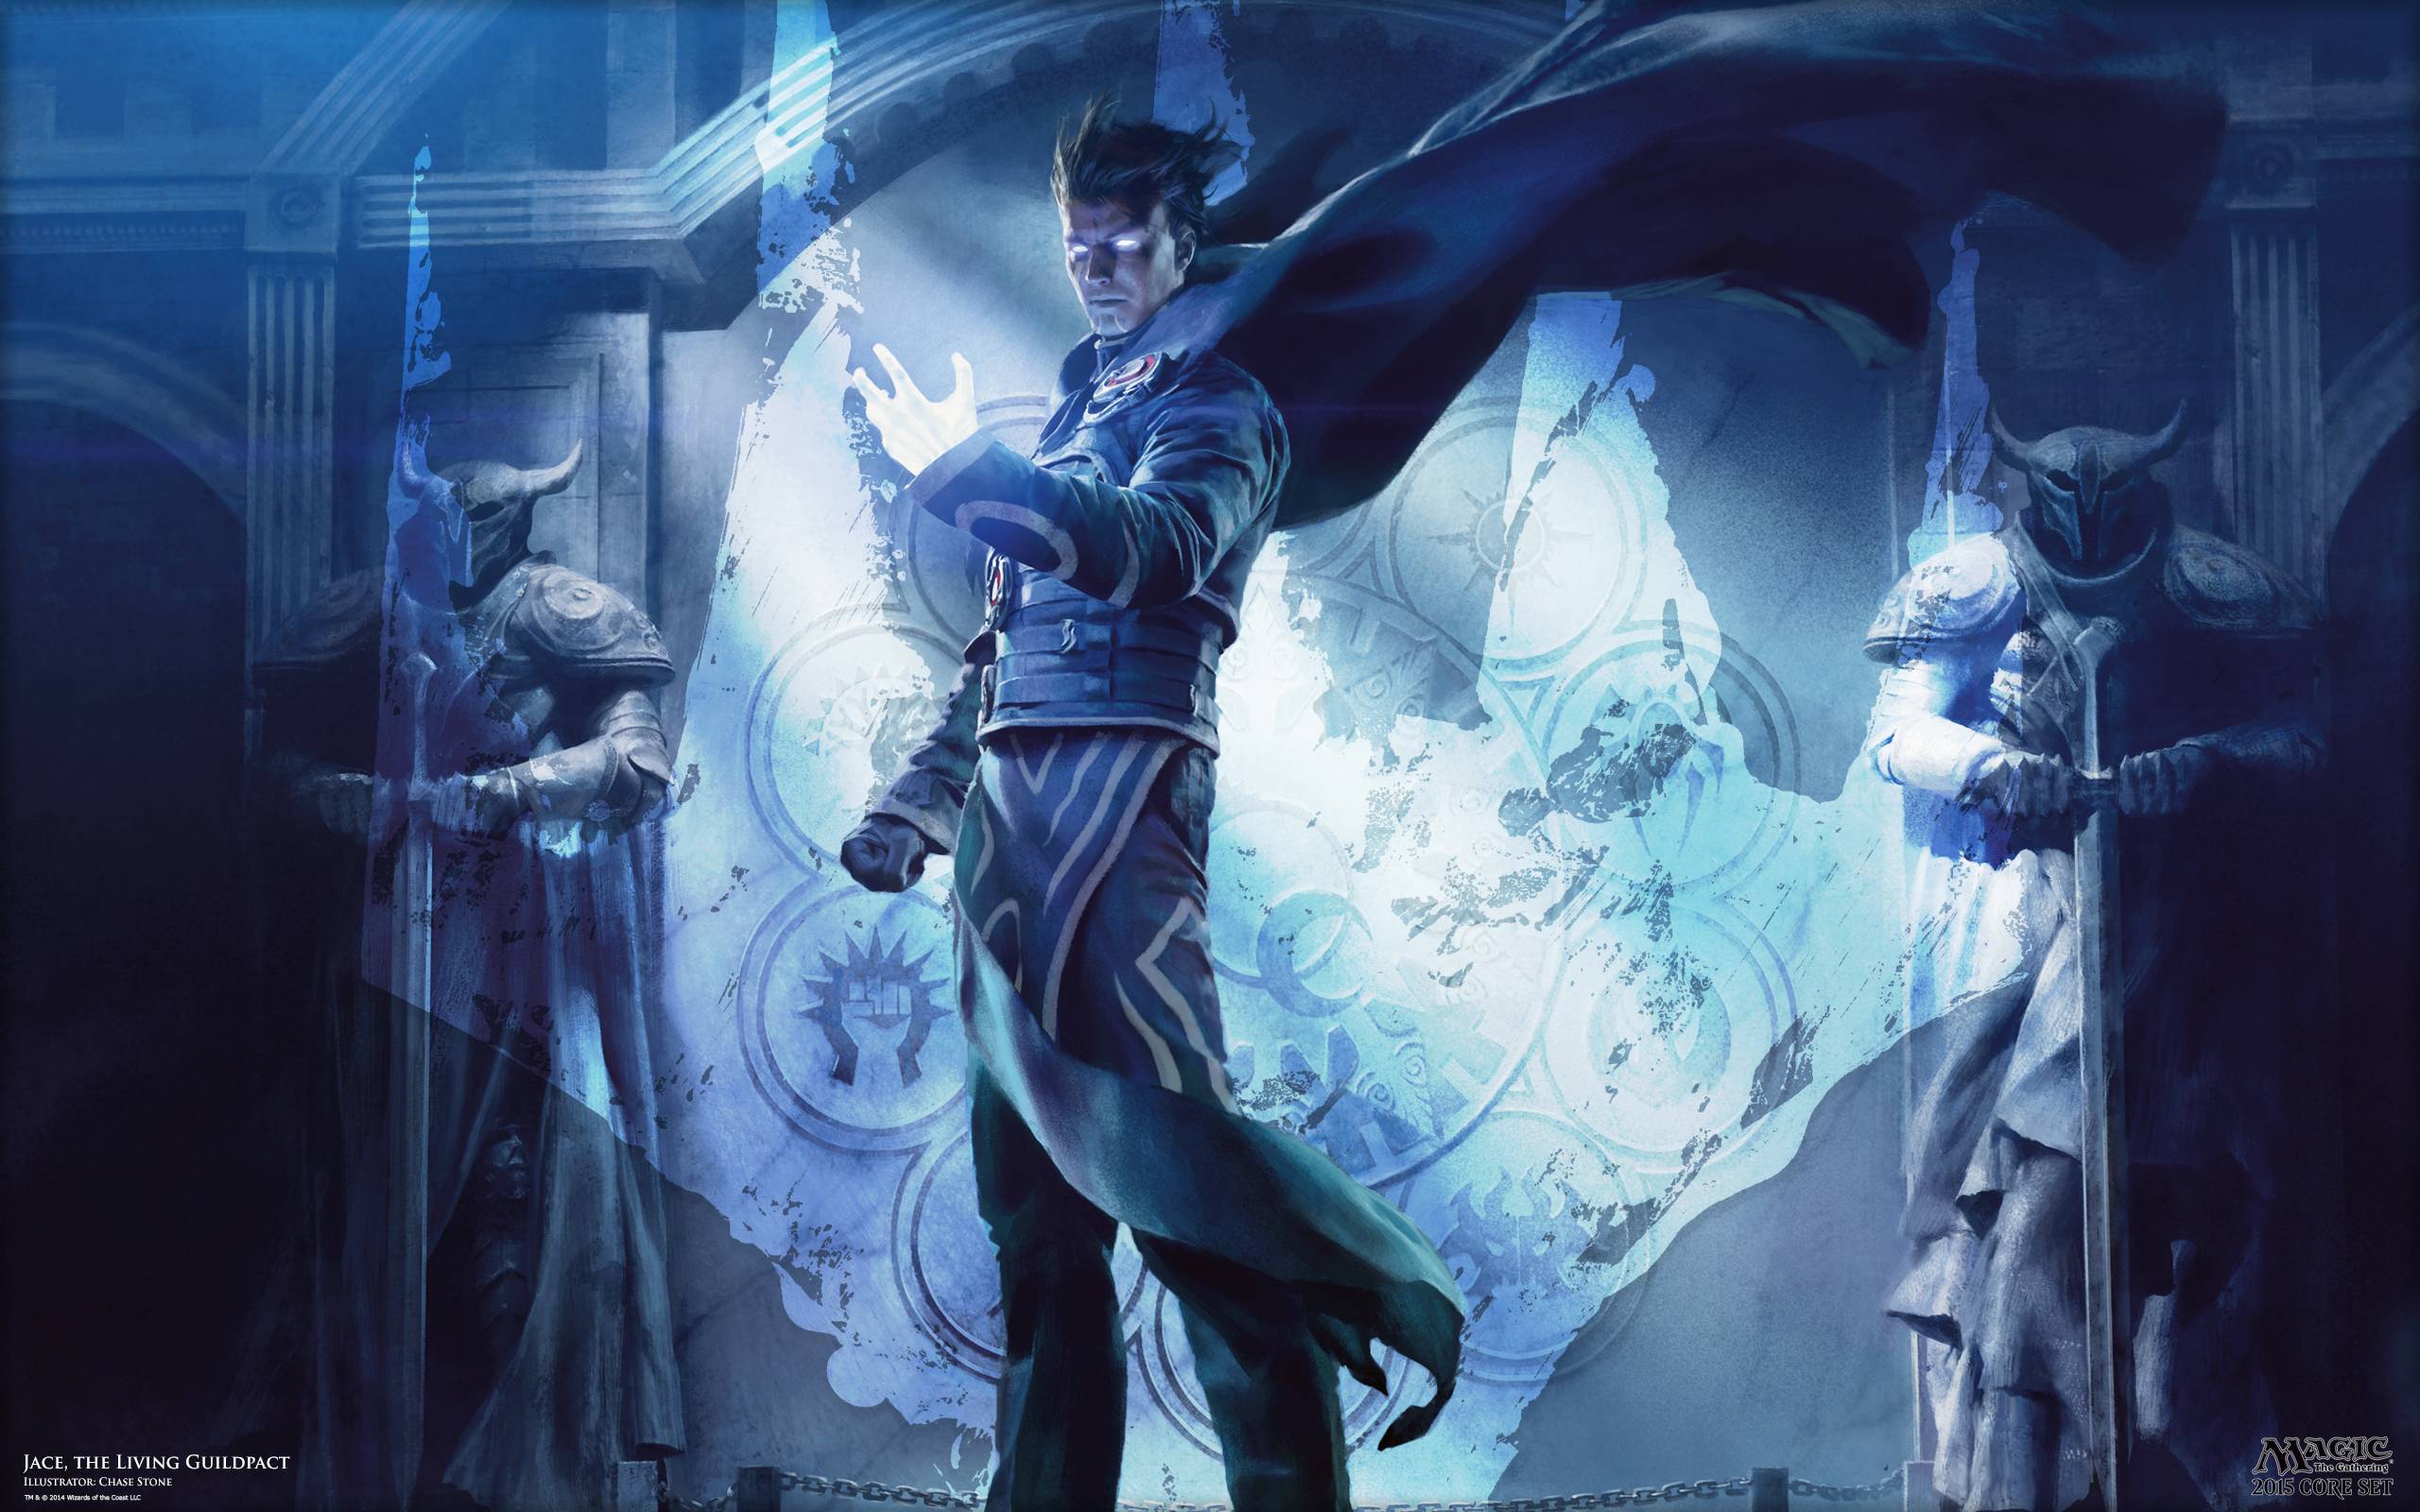 Jace, the Living Guildpact. MAGIC: THE GATHERING